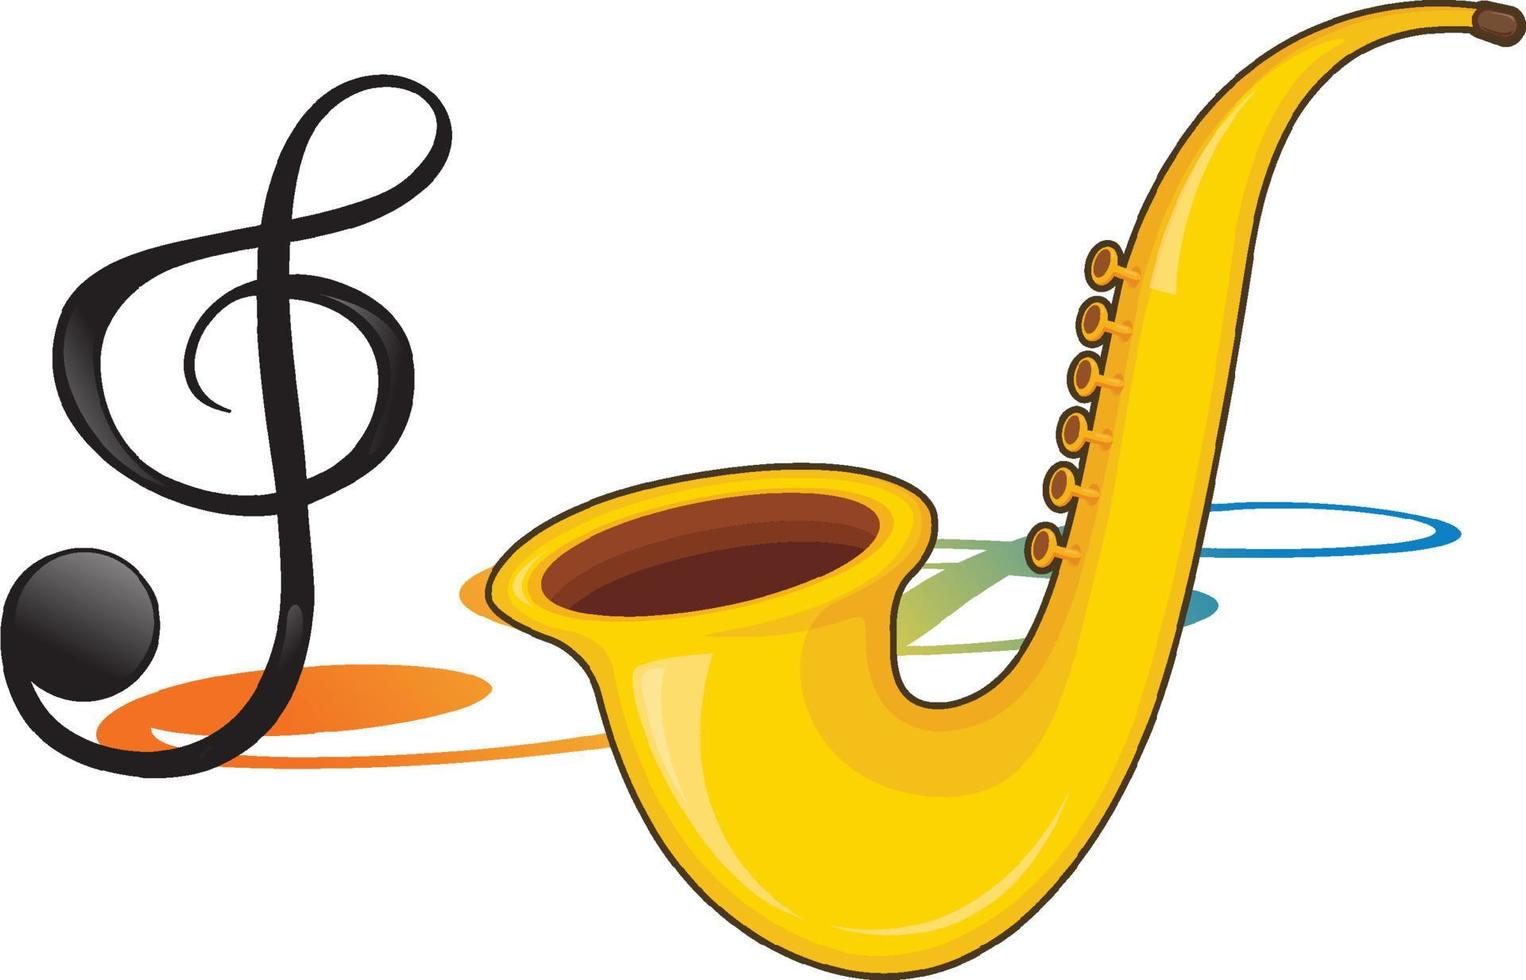 A saxophone with musical notes on white background vector